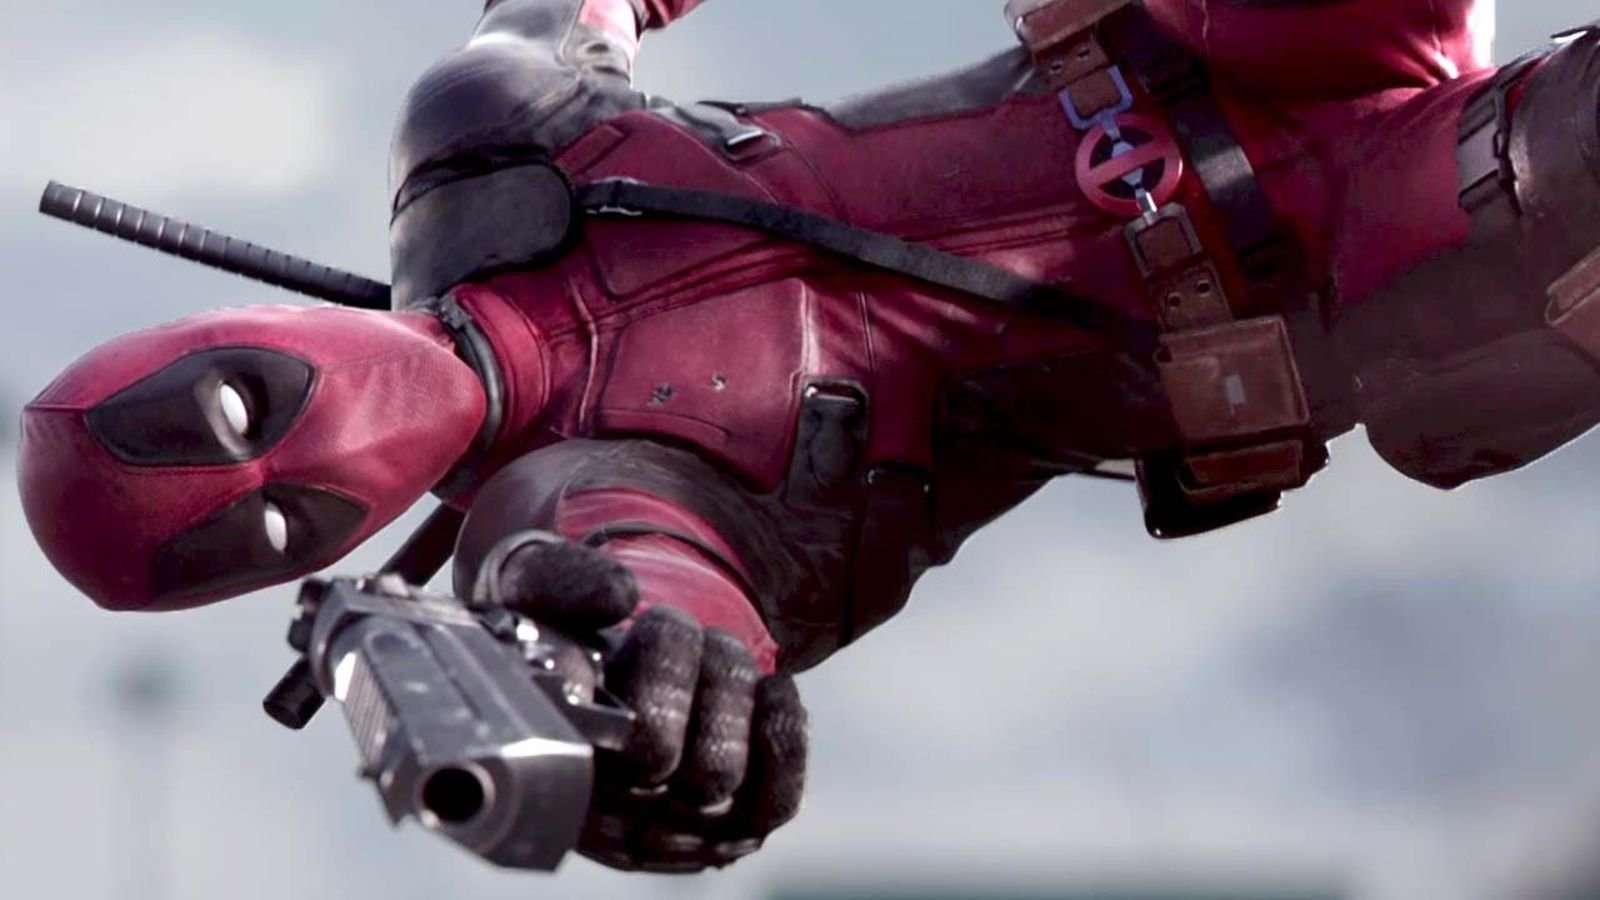 image for The Makers of Deadpool Had to Slash $7 Million From the Budget at the Last Minute